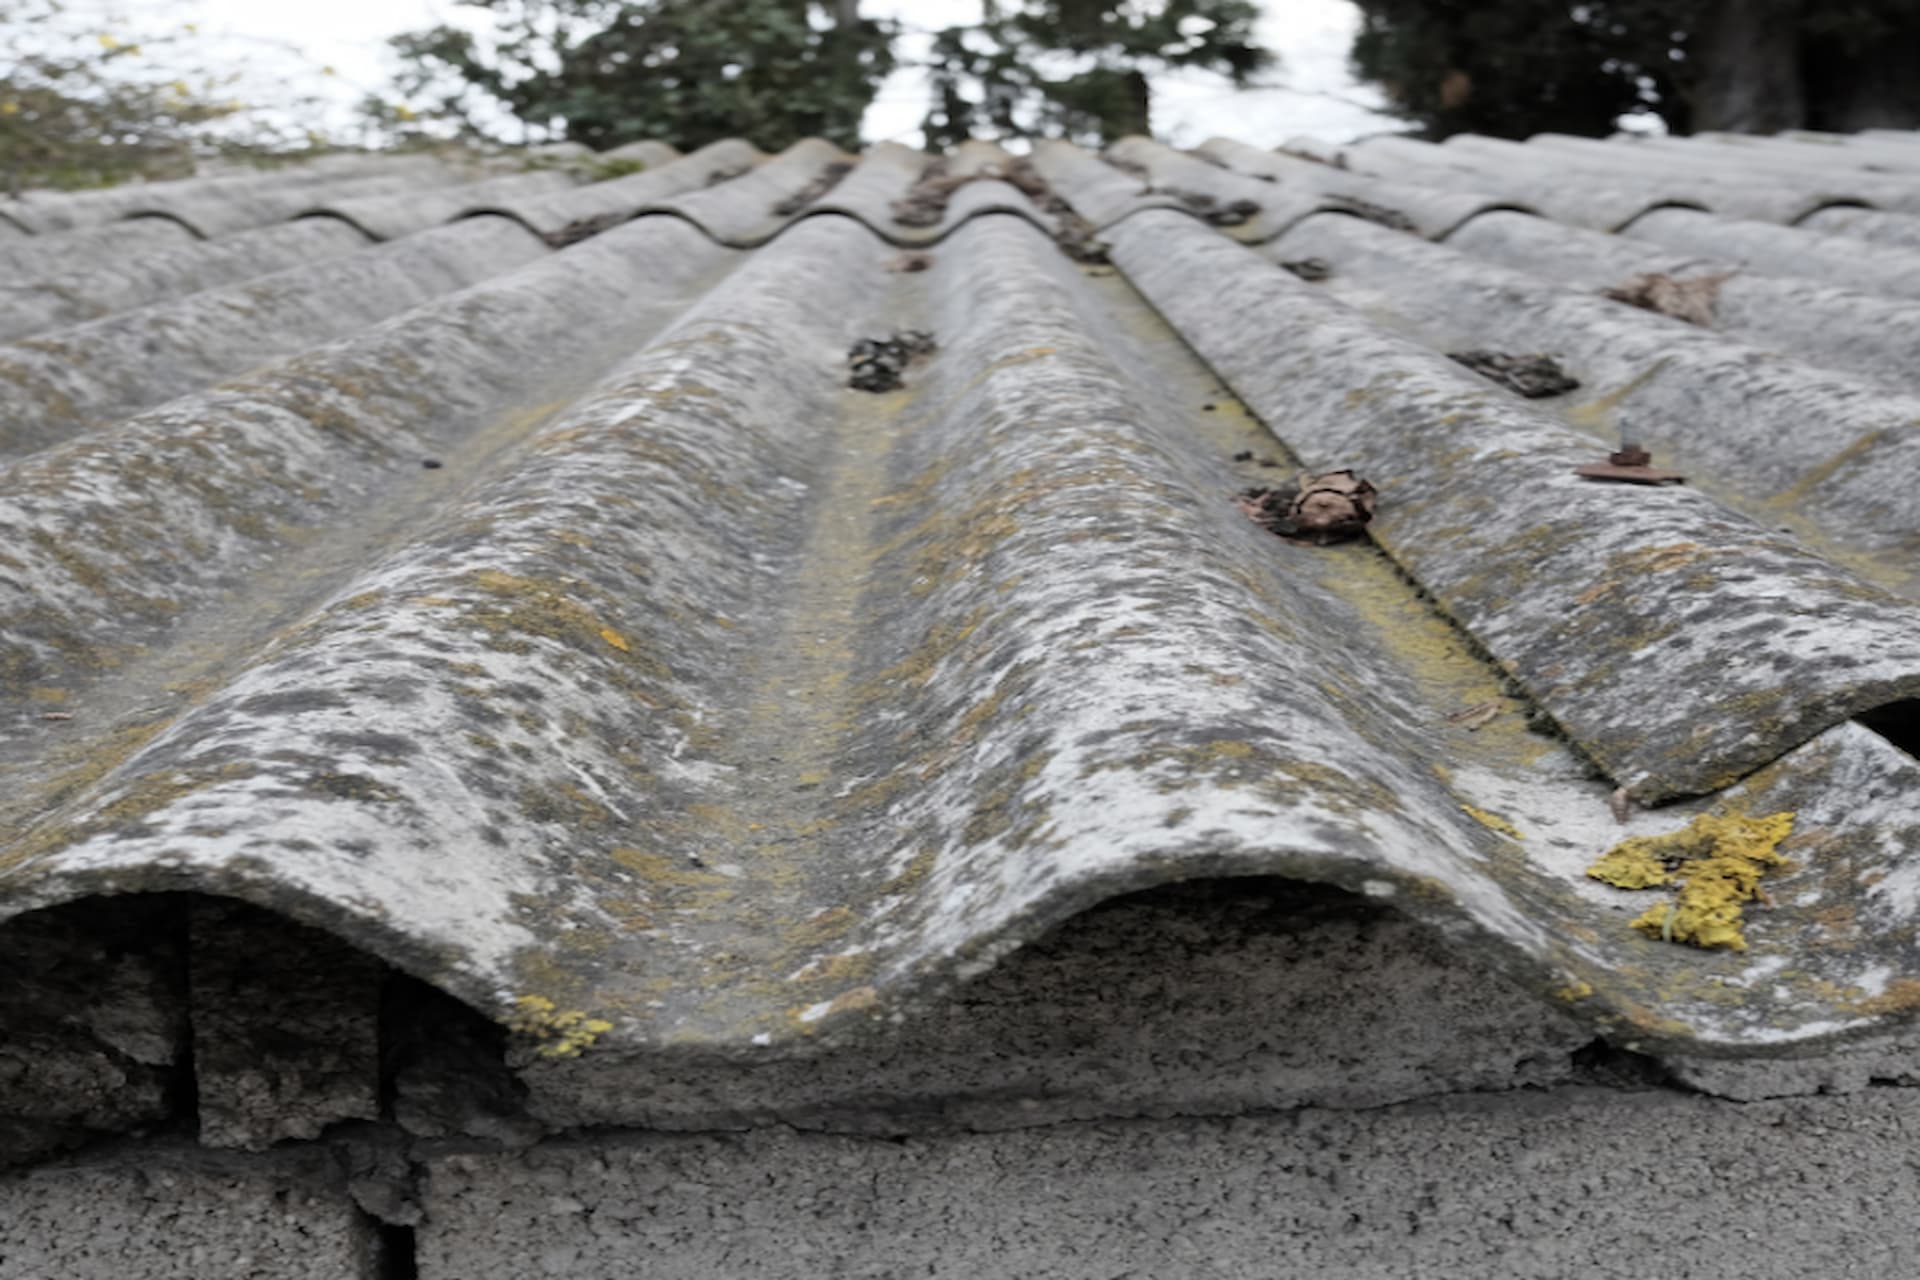 What Are The Benefits Of A Professional Asbestos Survey?